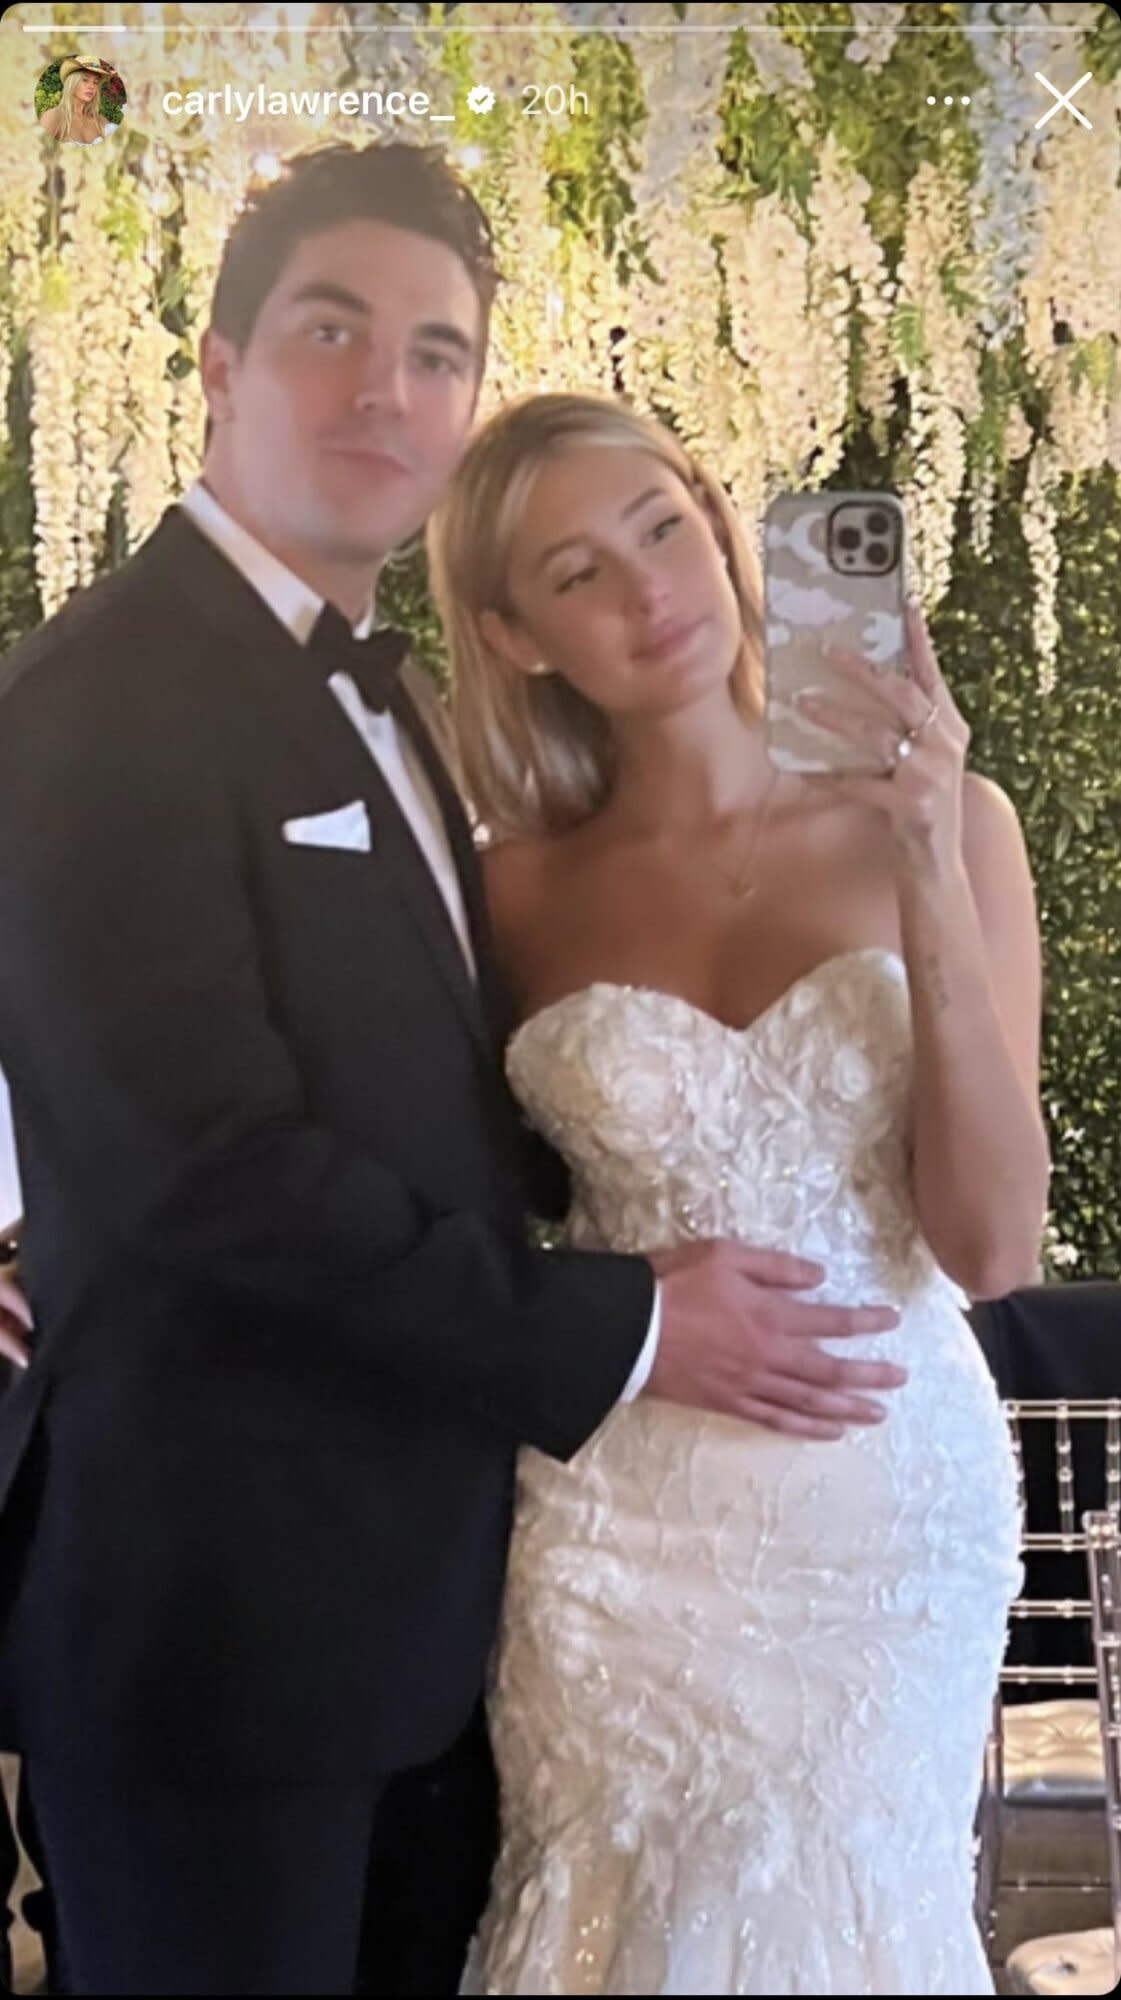 Too Hot to Handle's Carly Lawrence Weds Love Island's Bennett Sipes: They 'Truly Love Each Other'